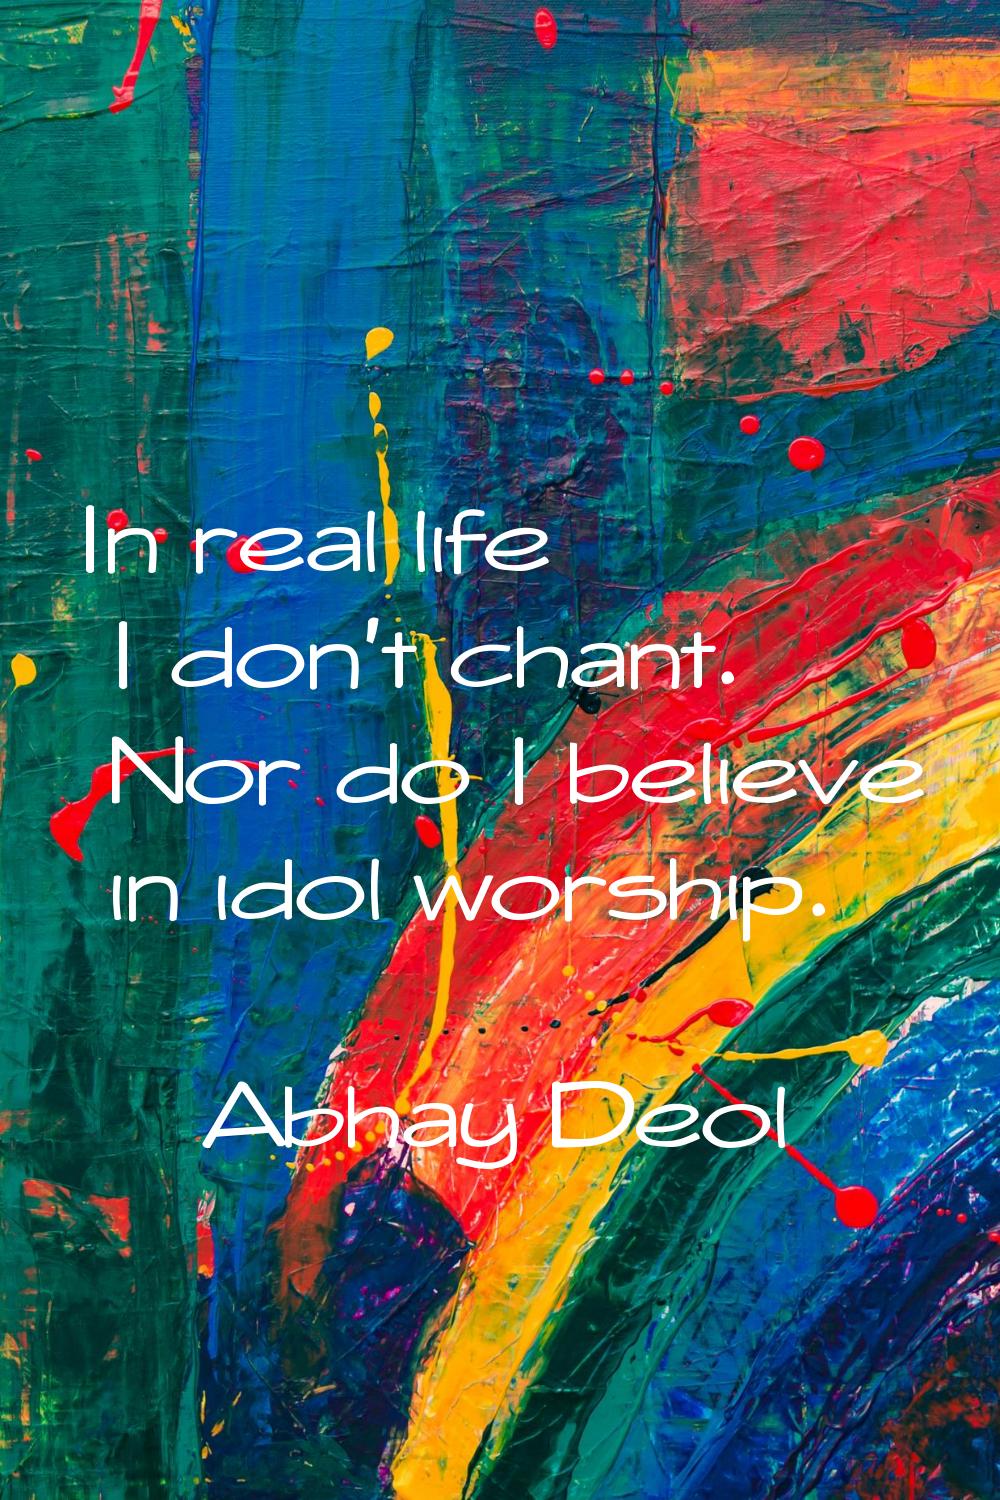 In real life I don't chant. Nor do I believe in idol worship.